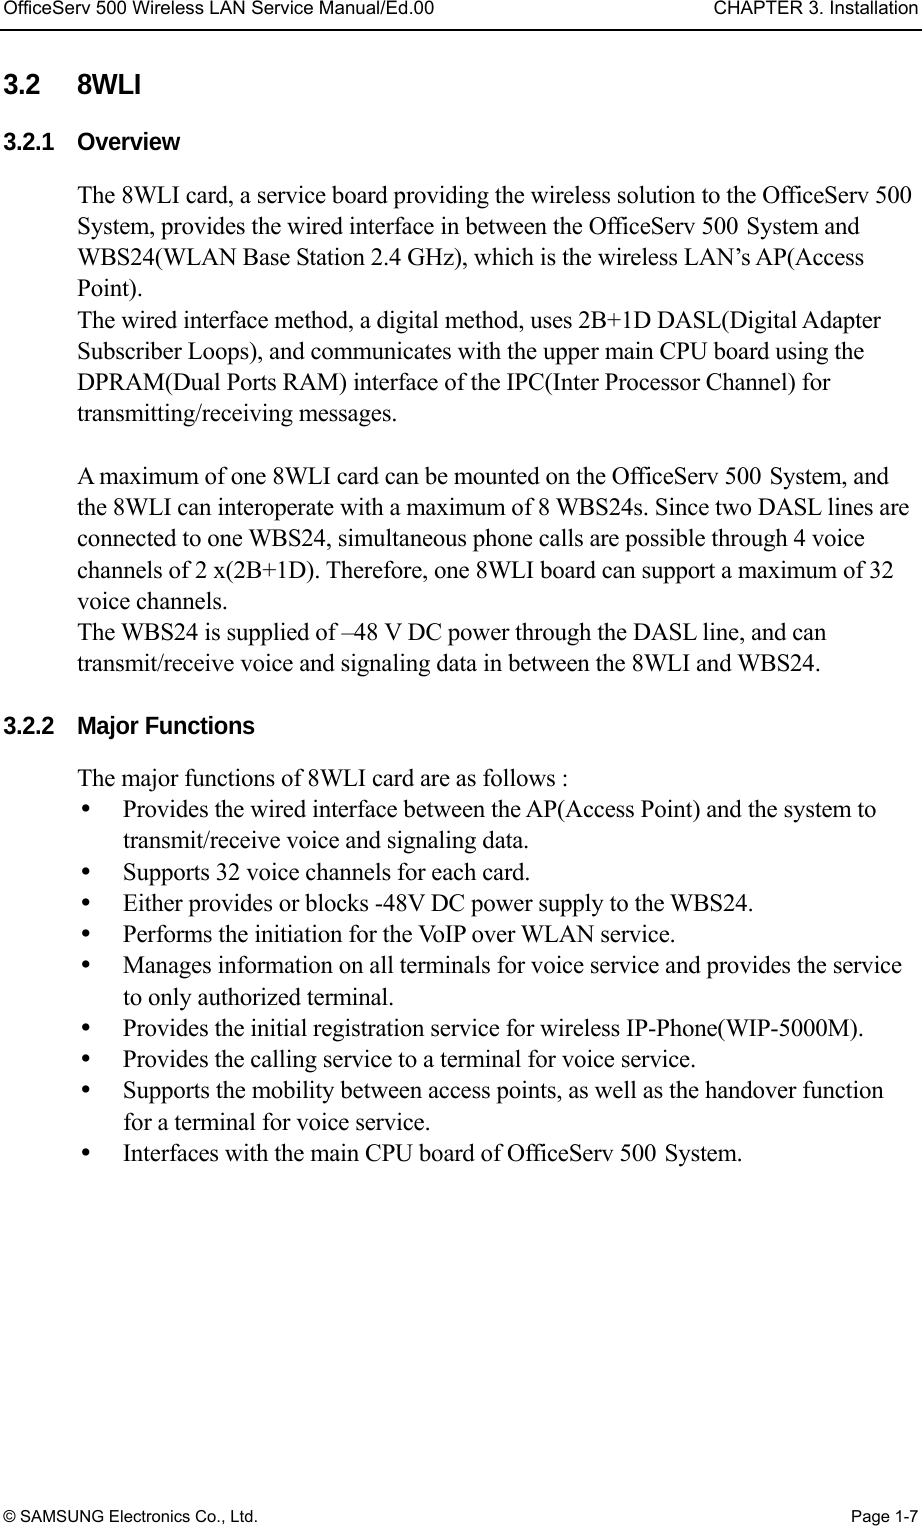 OfficeServ 500 Wireless LAN Service Manual/Ed.00  CHAPTER 3. Installation © SAMSUNG Electronics Co., Ltd.  Page 1-7 3.2 8WLI 3.2.1 Overview The 8WLI card, a service board providing the wireless solution to the OfficeServ 500 System, provides the wired interface in between the OfficeServ 500 System and WBS24(WLAN Base Station 2.4 GHz), which is the wireless LAN’s AP(Access Point).  The wired interface method, a digital method, uses 2B+1D DASL(Digital Adapter Subscriber Loops), and communicates with the upper main CPU board using the DPRAM(Dual Ports RAM) interface of the IPC(Inter Processor Channel) for transmitting/receiving messages.    A maximum of one 8WLI card can be mounted on the OfficeServ 500 System, and the 8WLI can interoperate with a maximum of 8 WBS24s. Since two DASL lines are connected to one WBS24, simultaneous phone calls are possible through 4 voice channels of 2 x(2B+1D). Therefore, one 8WLI board can support a maximum of 32 voice channels.   The WBS24 is supplied of –48 V DC power through the DASL line, and can transmit/receive voice and signaling data in between the 8WLI and WBS24.    3.2.2  Major Functions The major functions of 8WLI card are as follows :     Provides the wired interface between the AP(Access Point) and the system to transmit/receive voice and signaling data.       Supports 32 voice channels for each card.     Either provides or blocks -48V DC power supply to the WBS24.     Performs the initiation for the VoIP over WLAN service.     Manages information on all terminals for voice service and provides the service to only authorized terminal.     Provides the initial registration service for wireless IP-Phone(WIP-5000M).     Provides the calling service to a terminal for voice service.     Supports the mobility between access points, as well as the handover function for a terminal for voice service.       Interfaces with the main CPU board of OfficeServ 500 System.  